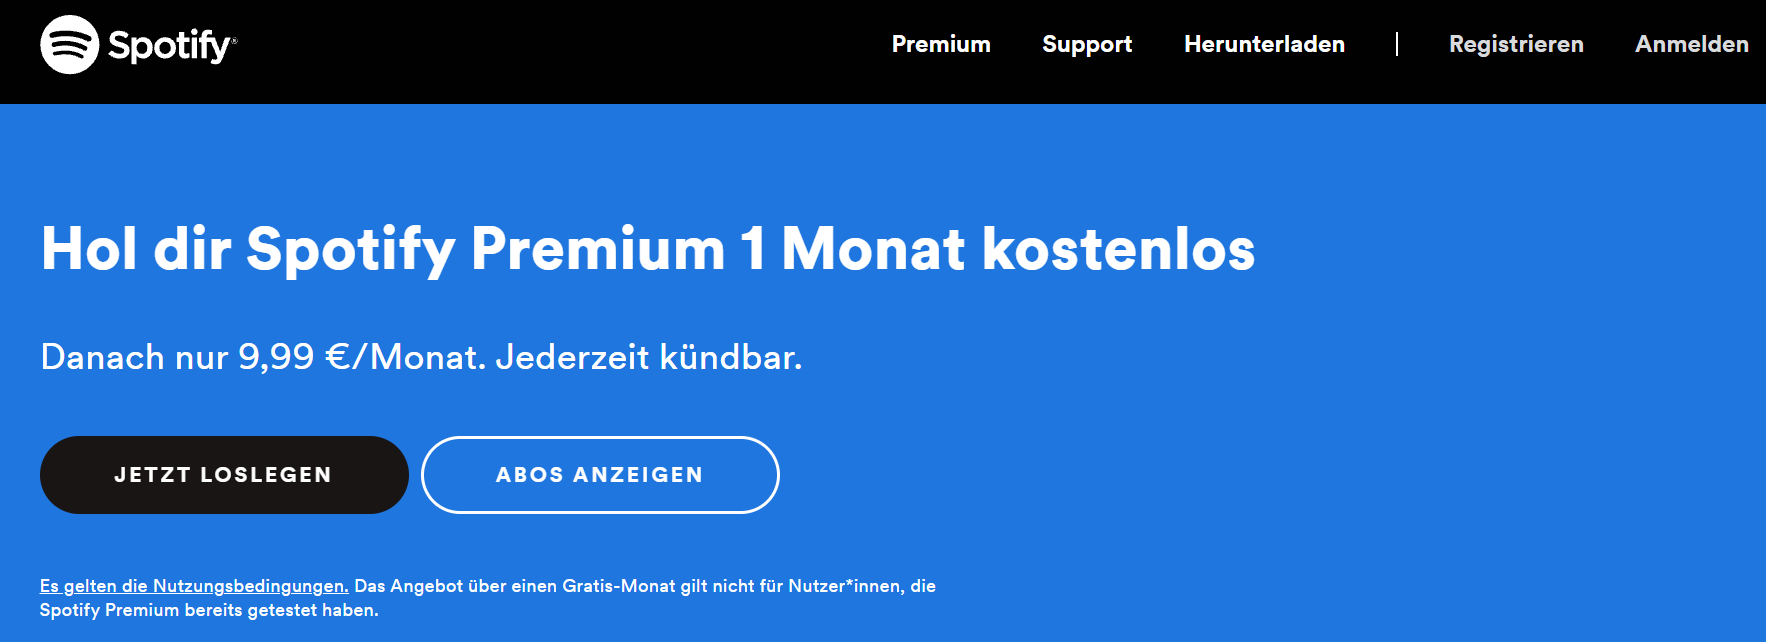 CTA above the fold bei spotify